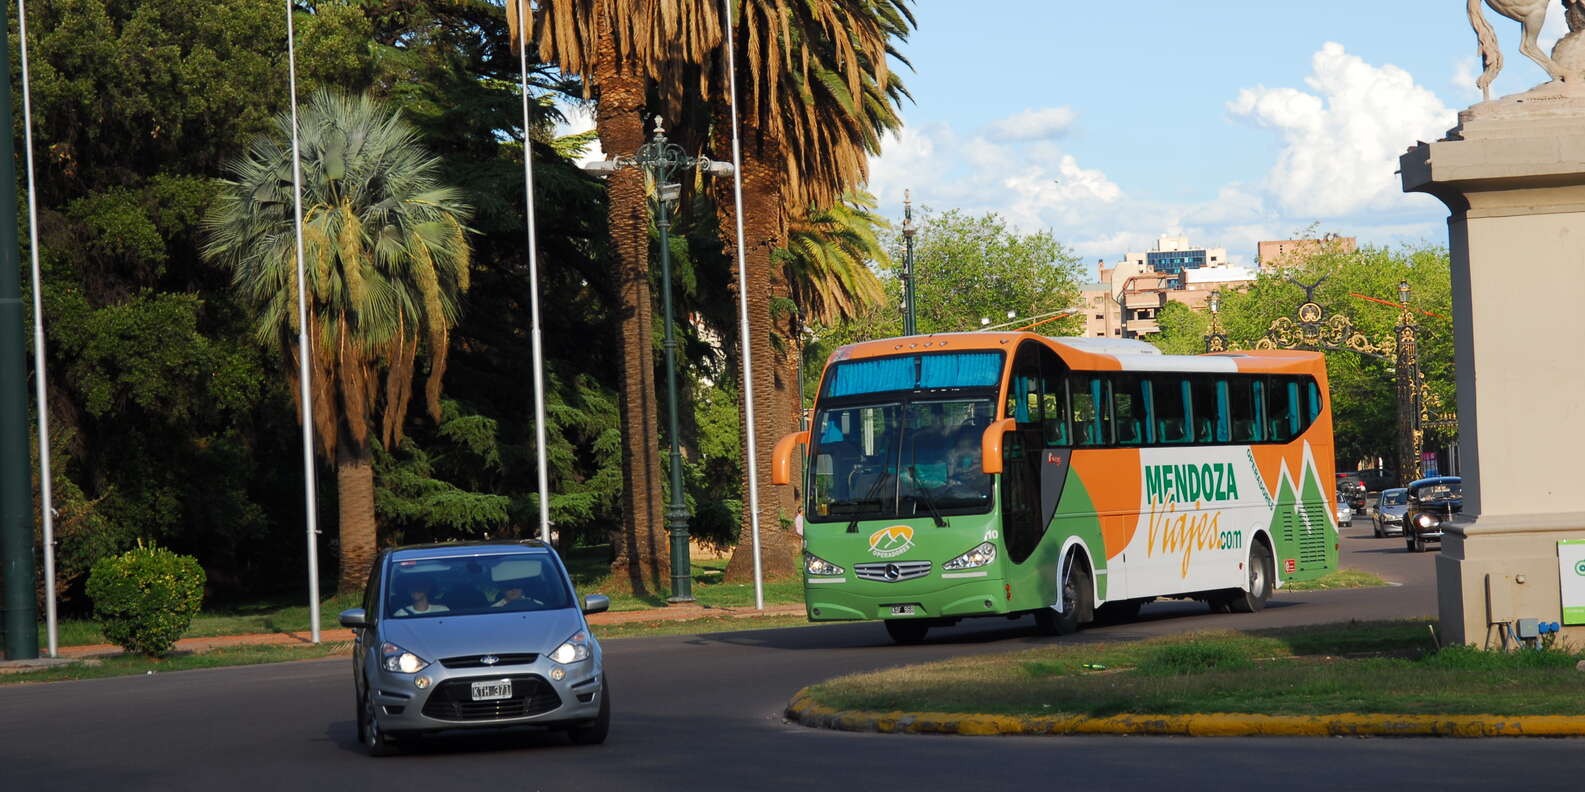 things to do in Mendoza